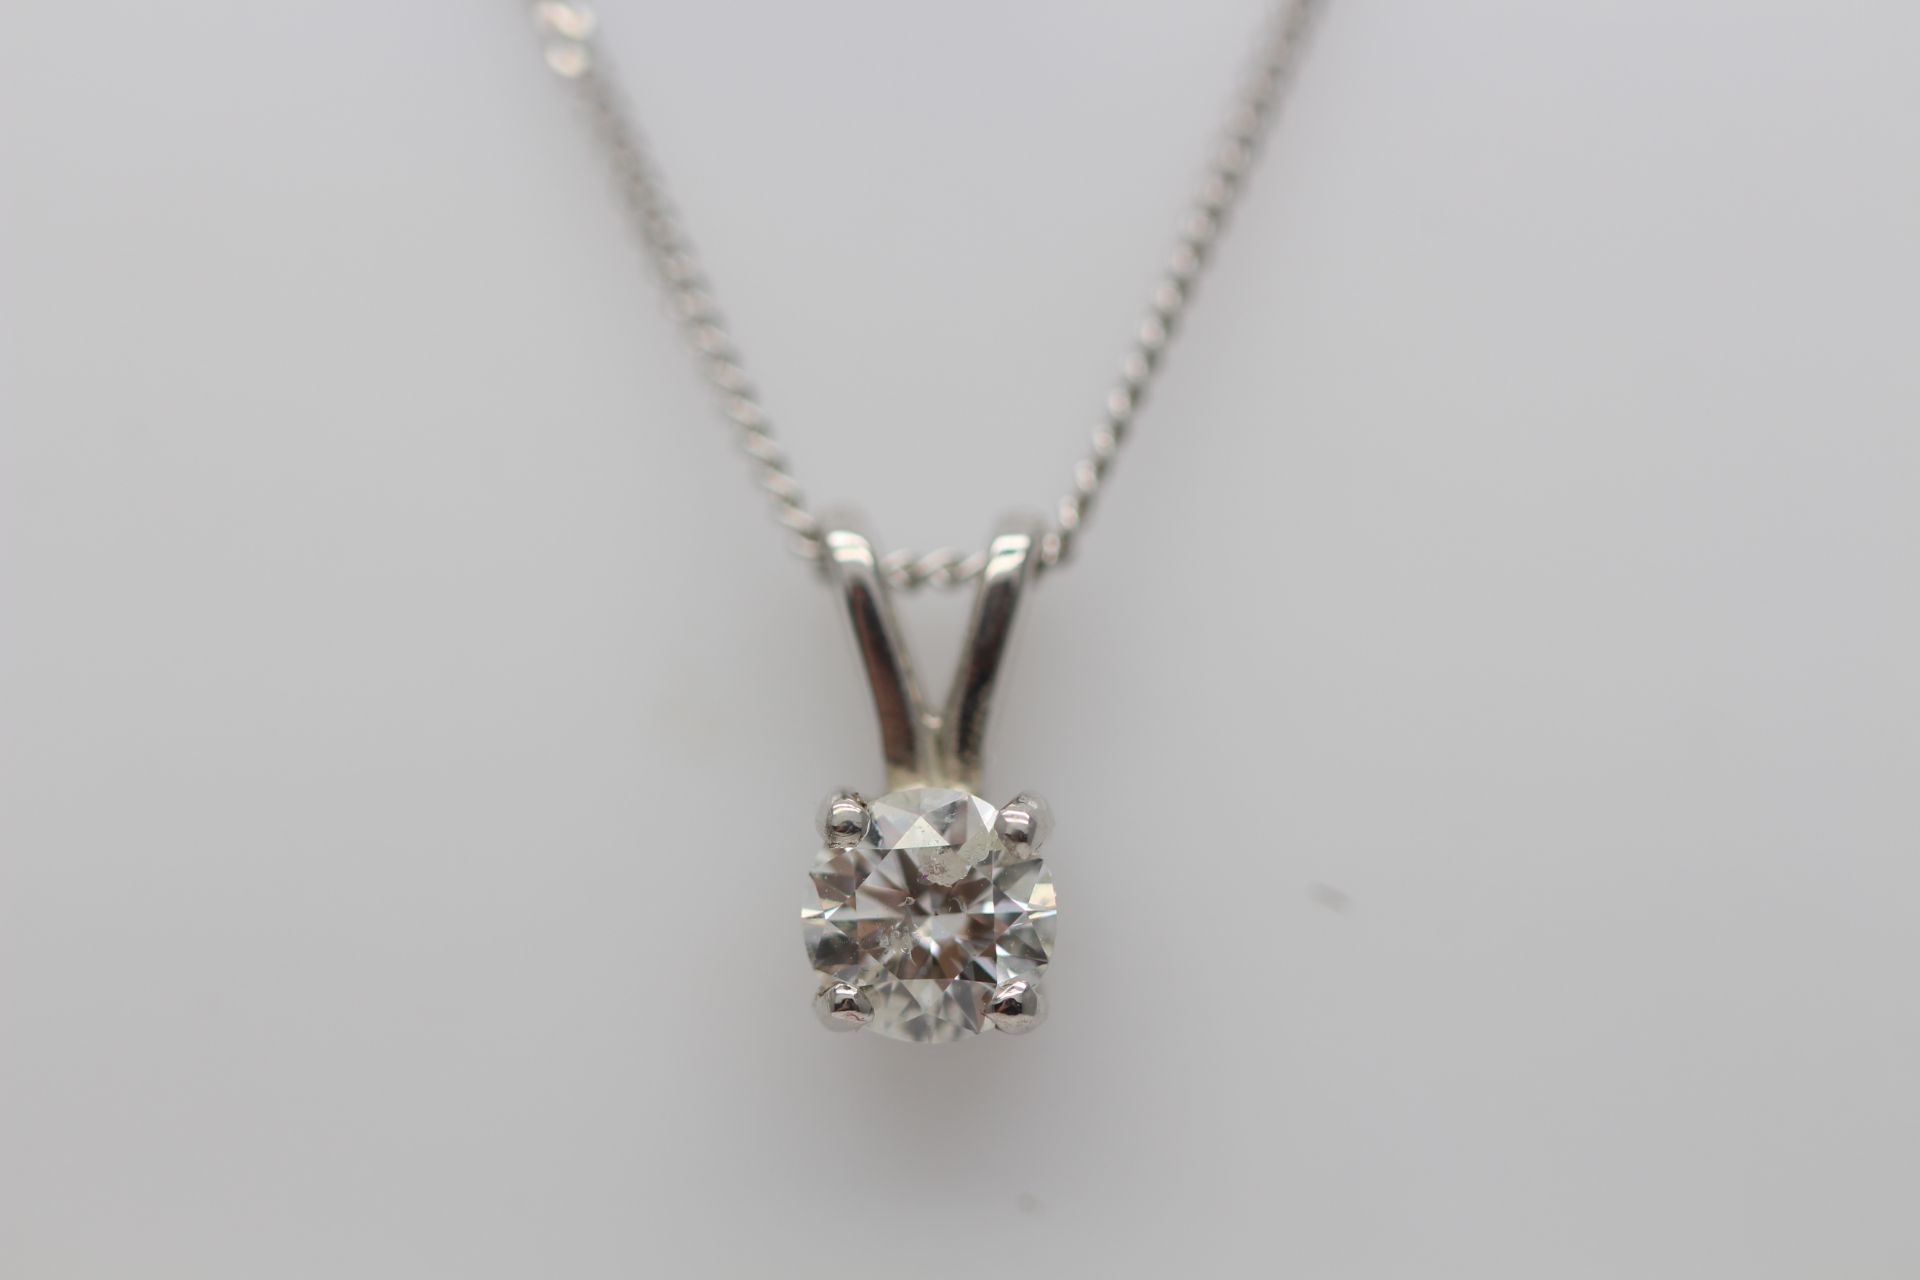 9CT WHITE GOLD LADIES DIAMOND SOLITAIRE PENDENT AND CHAIN, SET WITH ONE BRILLIANT CUT DIAMOND - Image 2 of 3